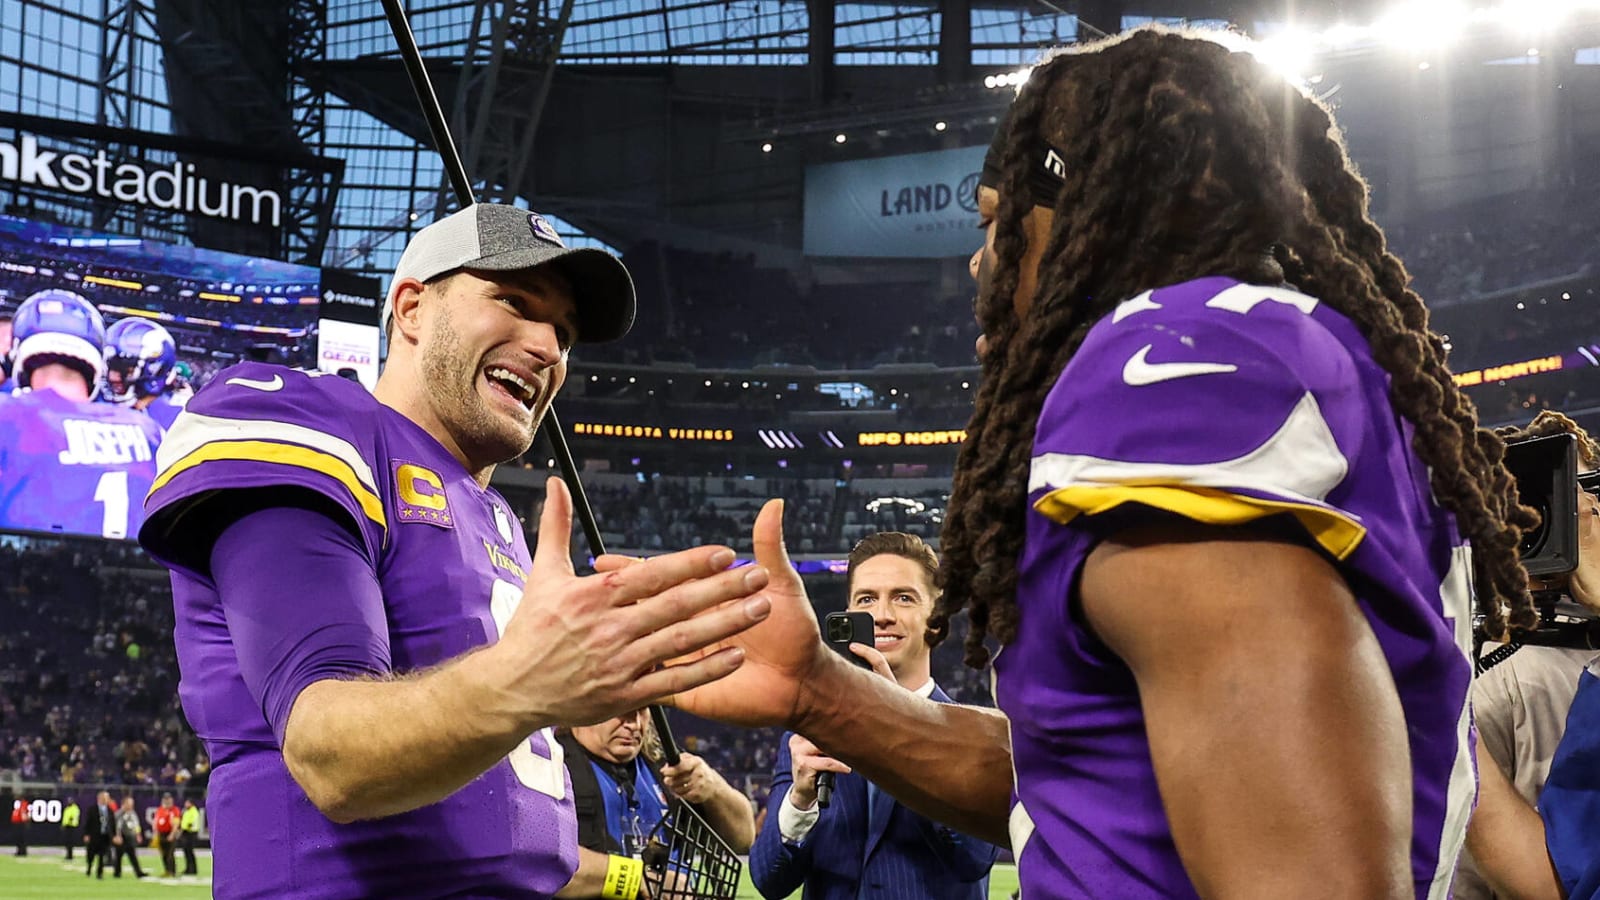 Vikings complete biggest comeback in NFL history to beat Colts